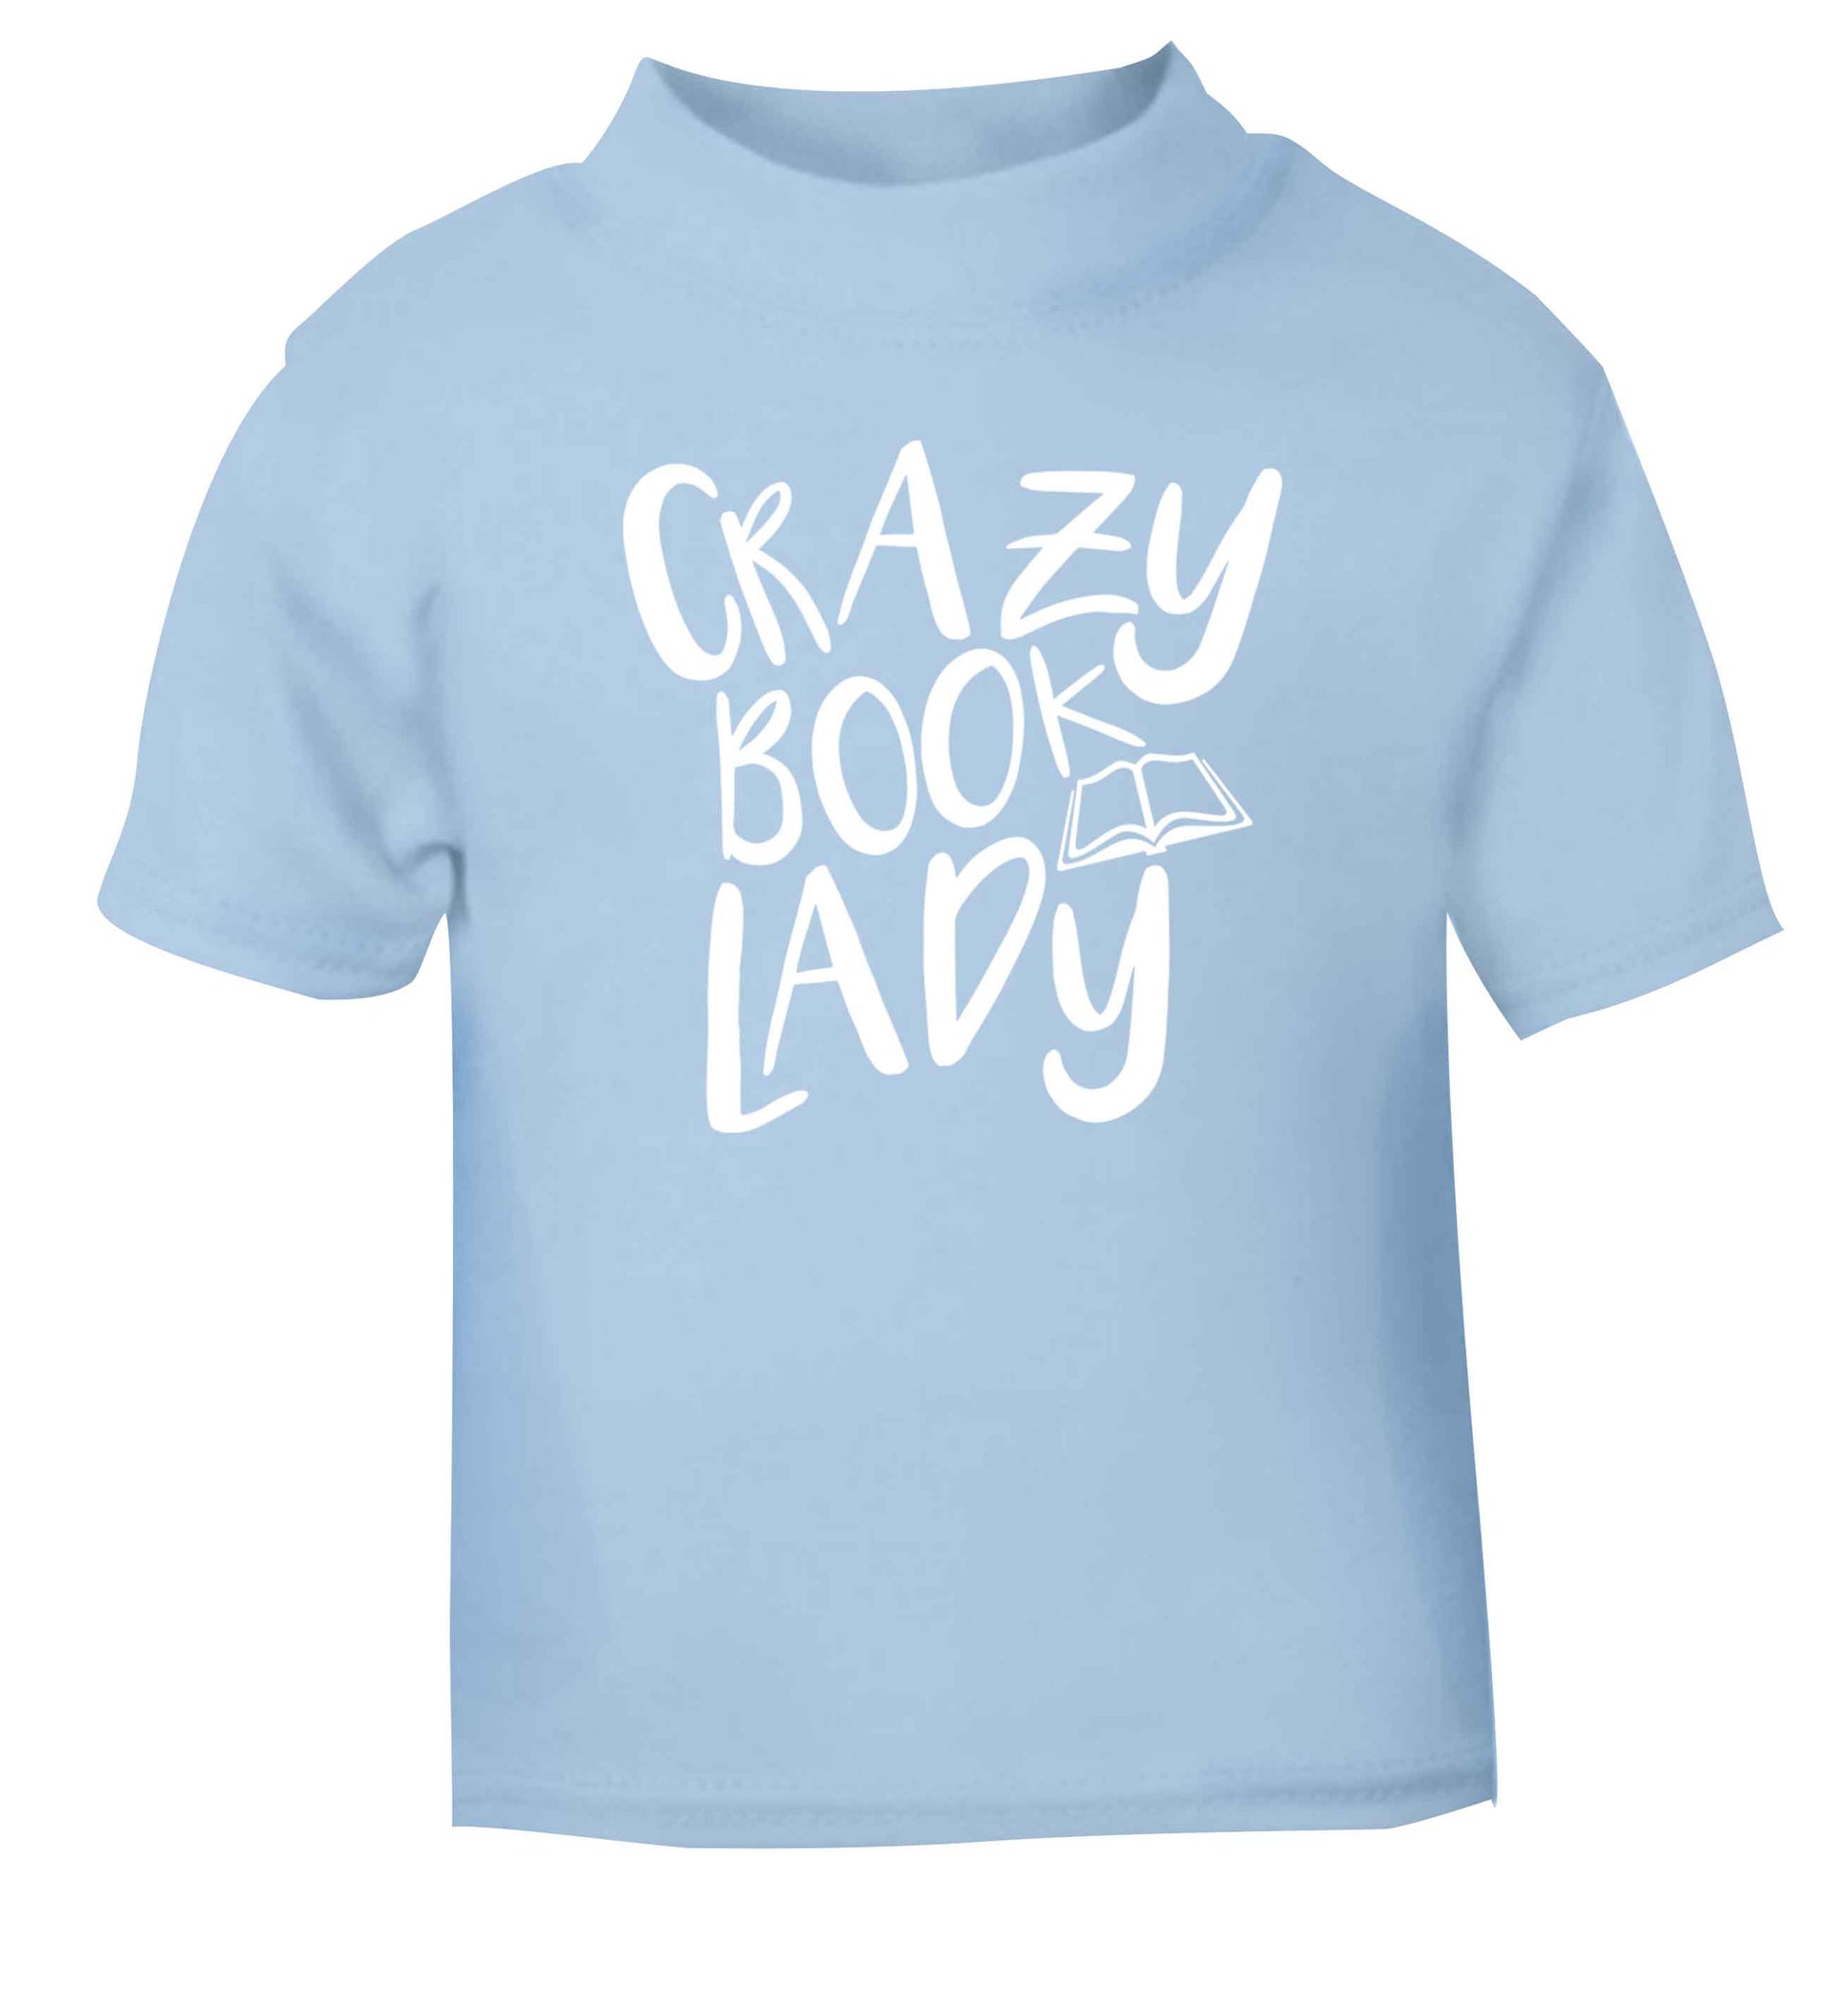 Crazy book lady light blue Baby Toddler Tshirt 2 Years